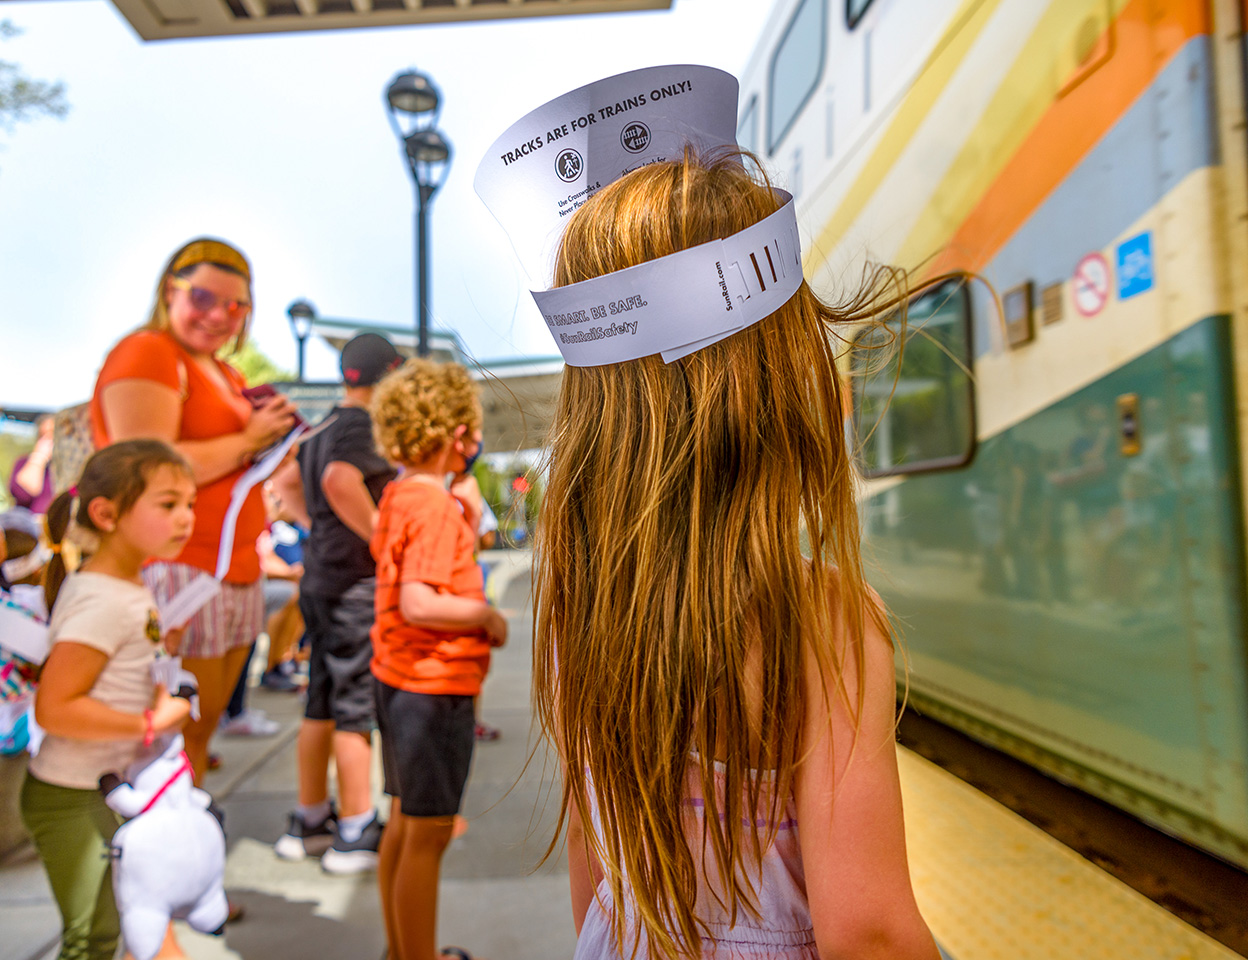 Young girl with group waiting on platform waiting to board SunRail Train.